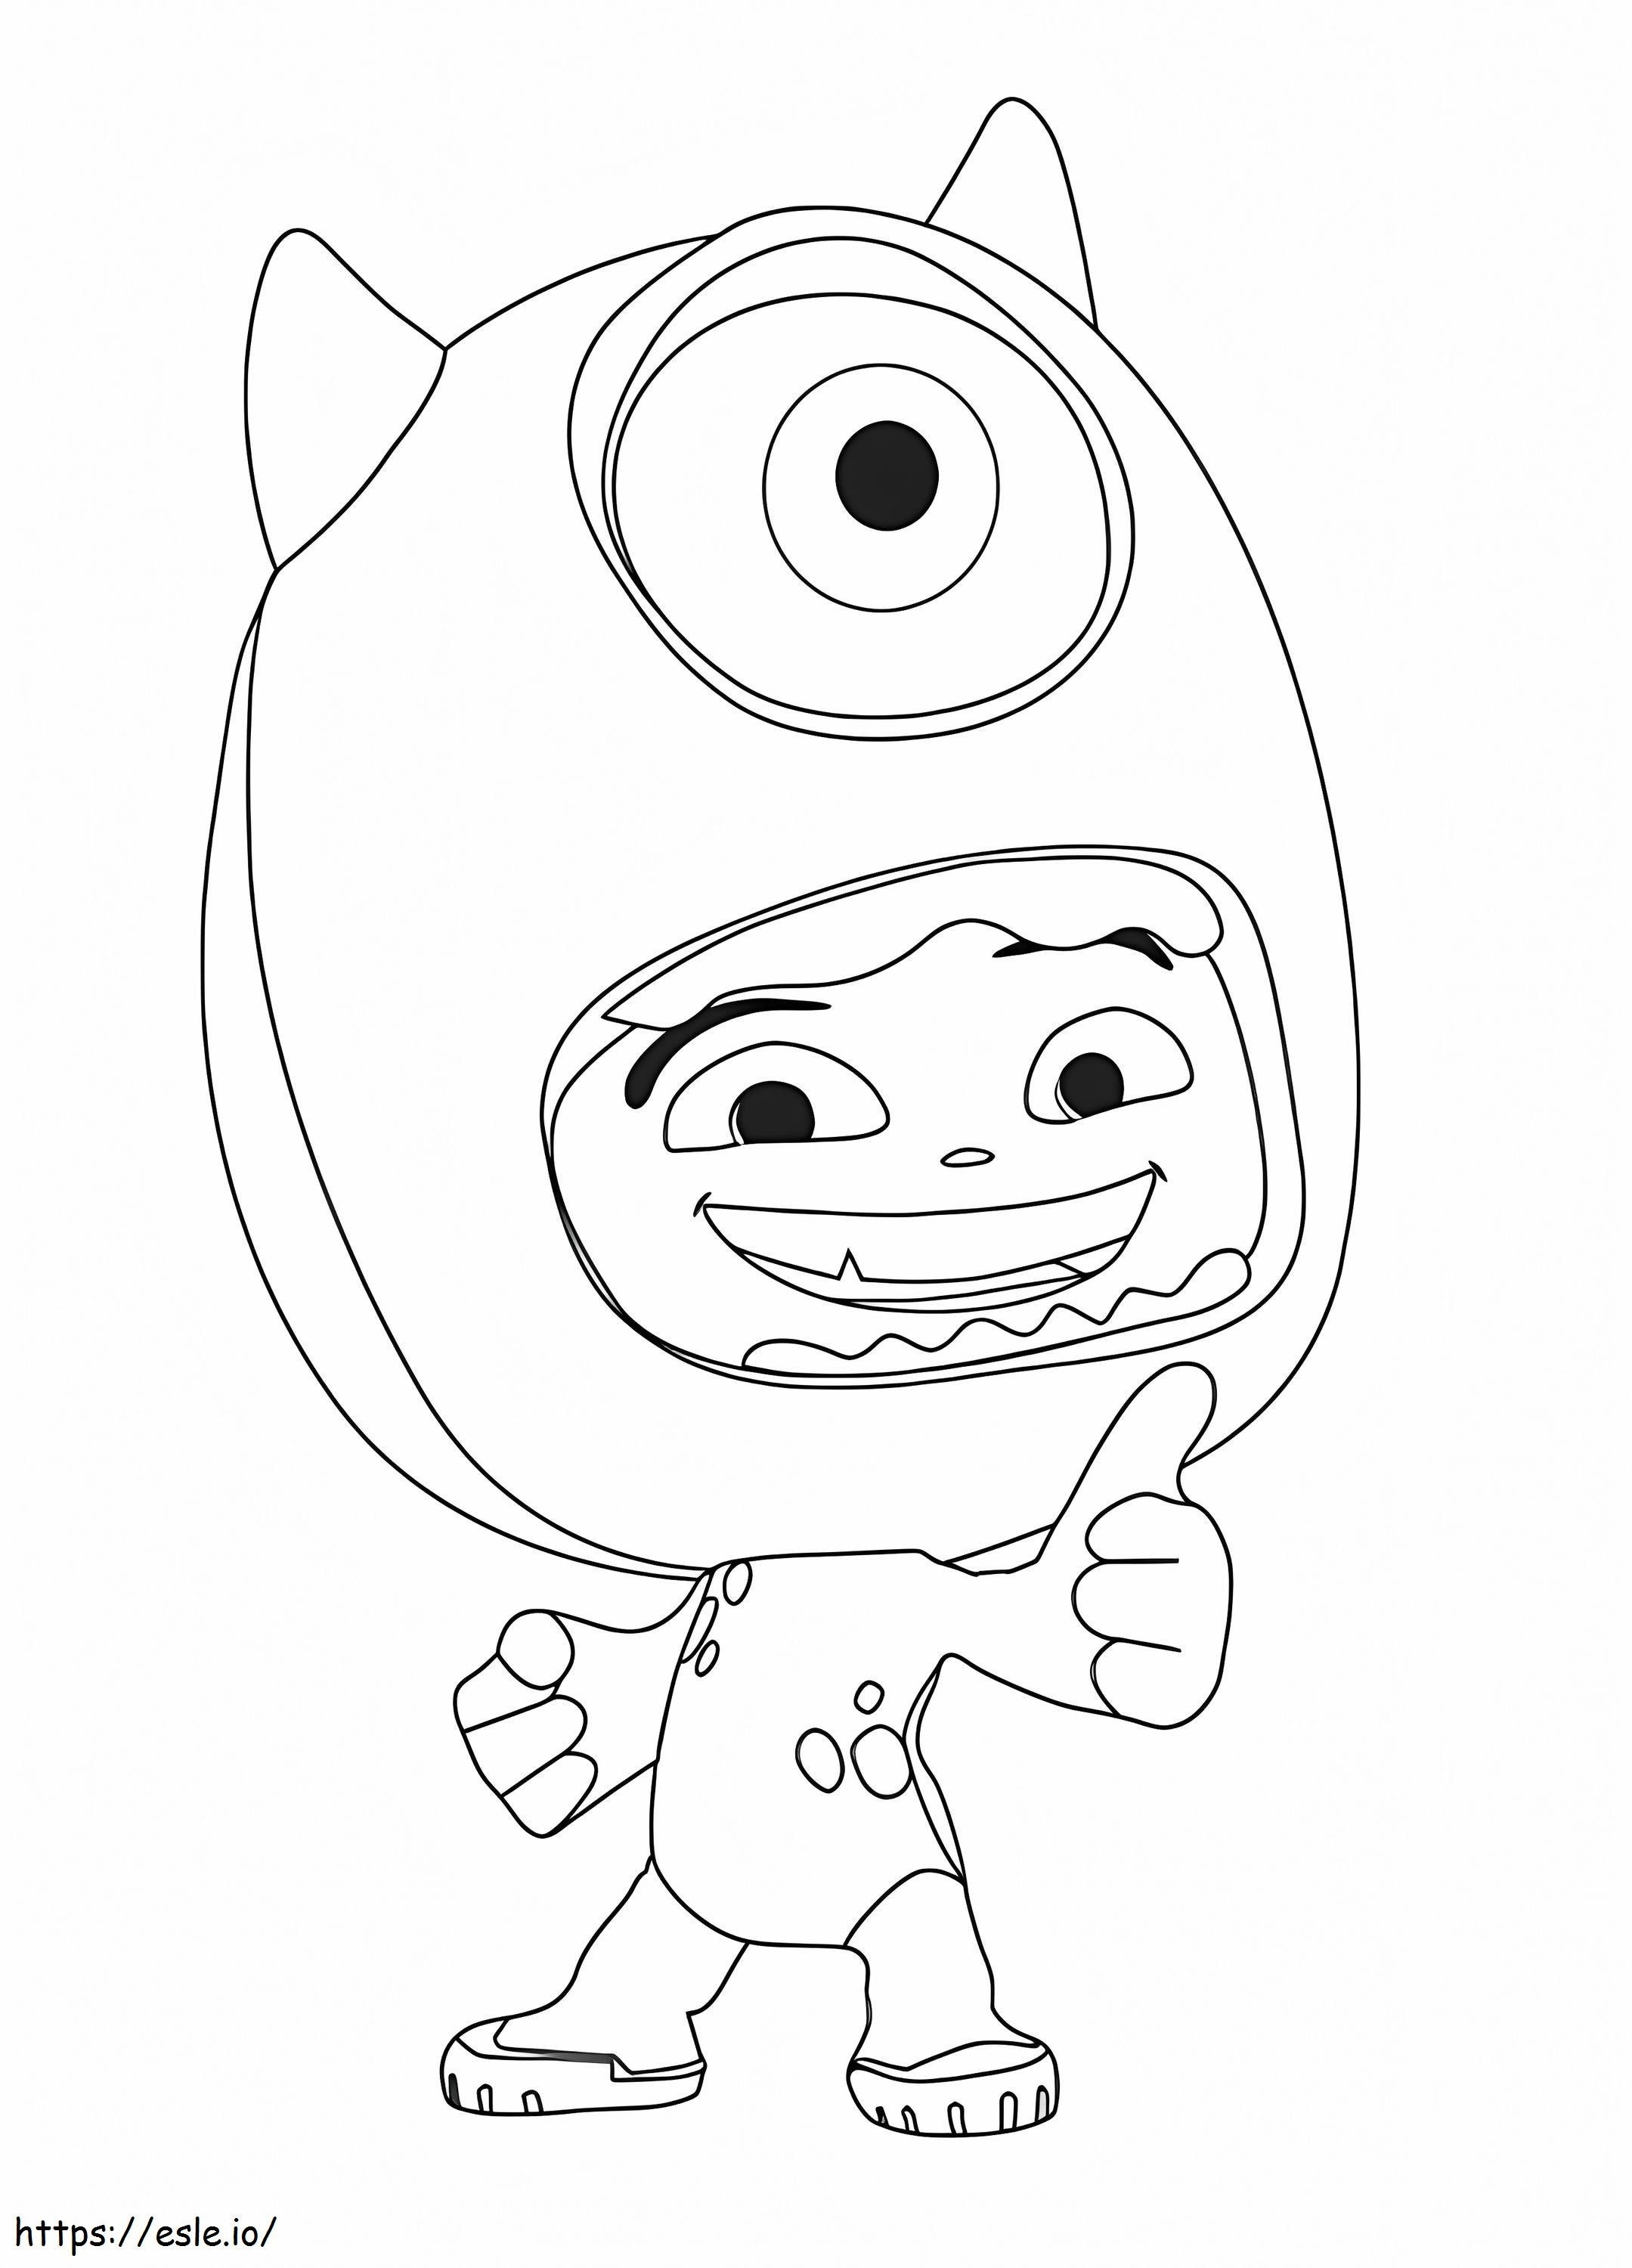 Mike Wazowski From Disney Universe coloring page